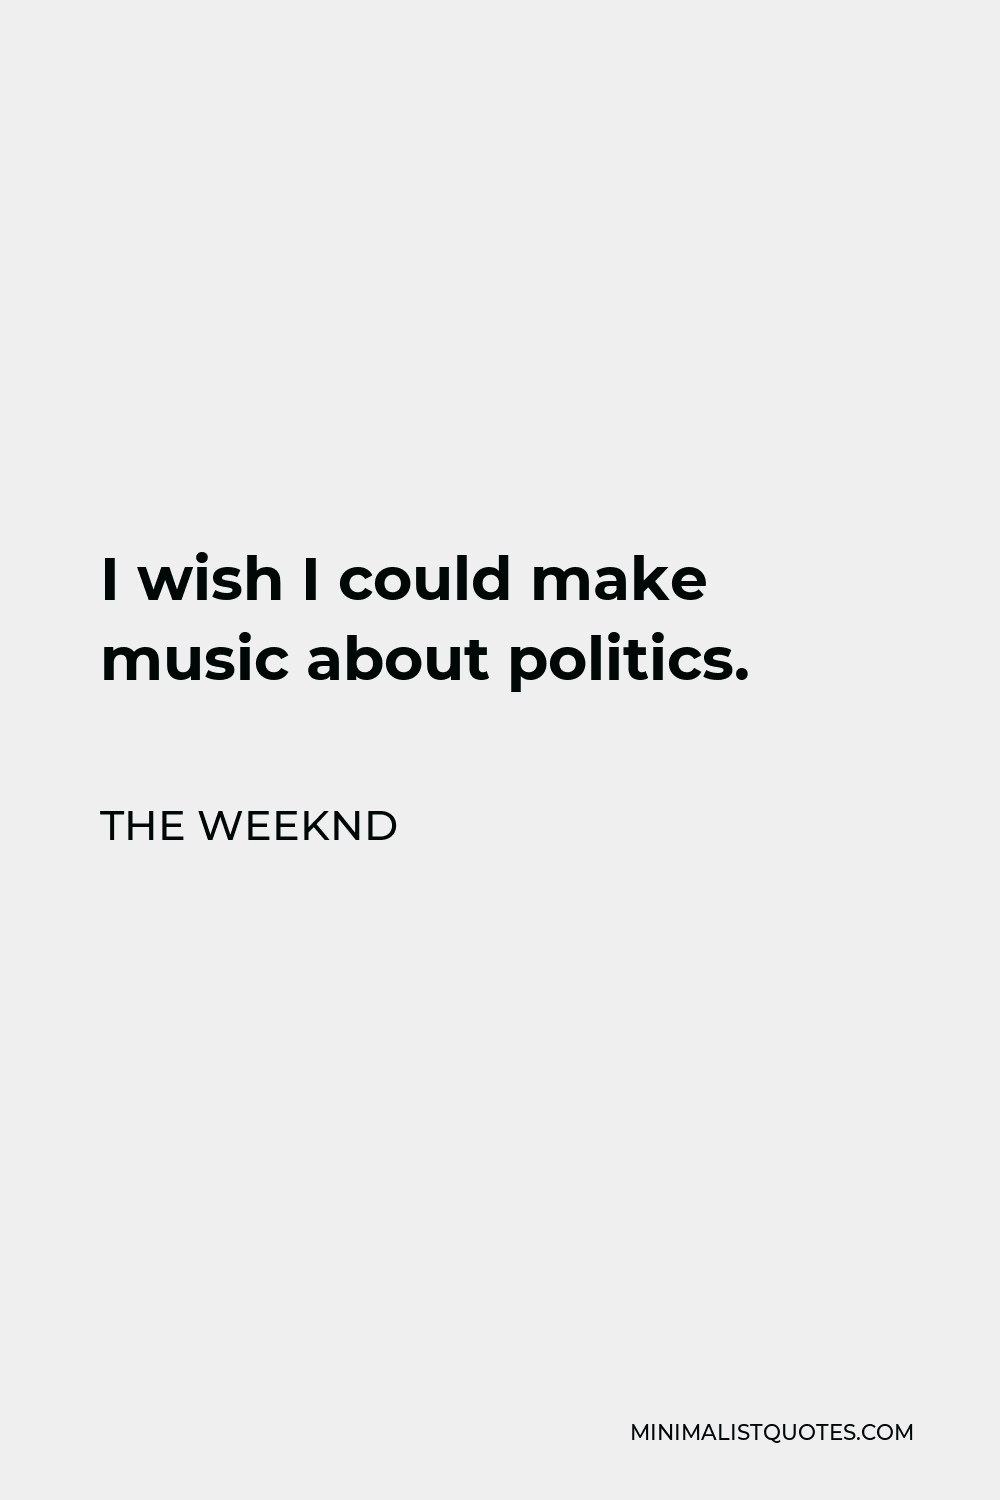 The Weeknd Quote - I wish I could make music about politics.